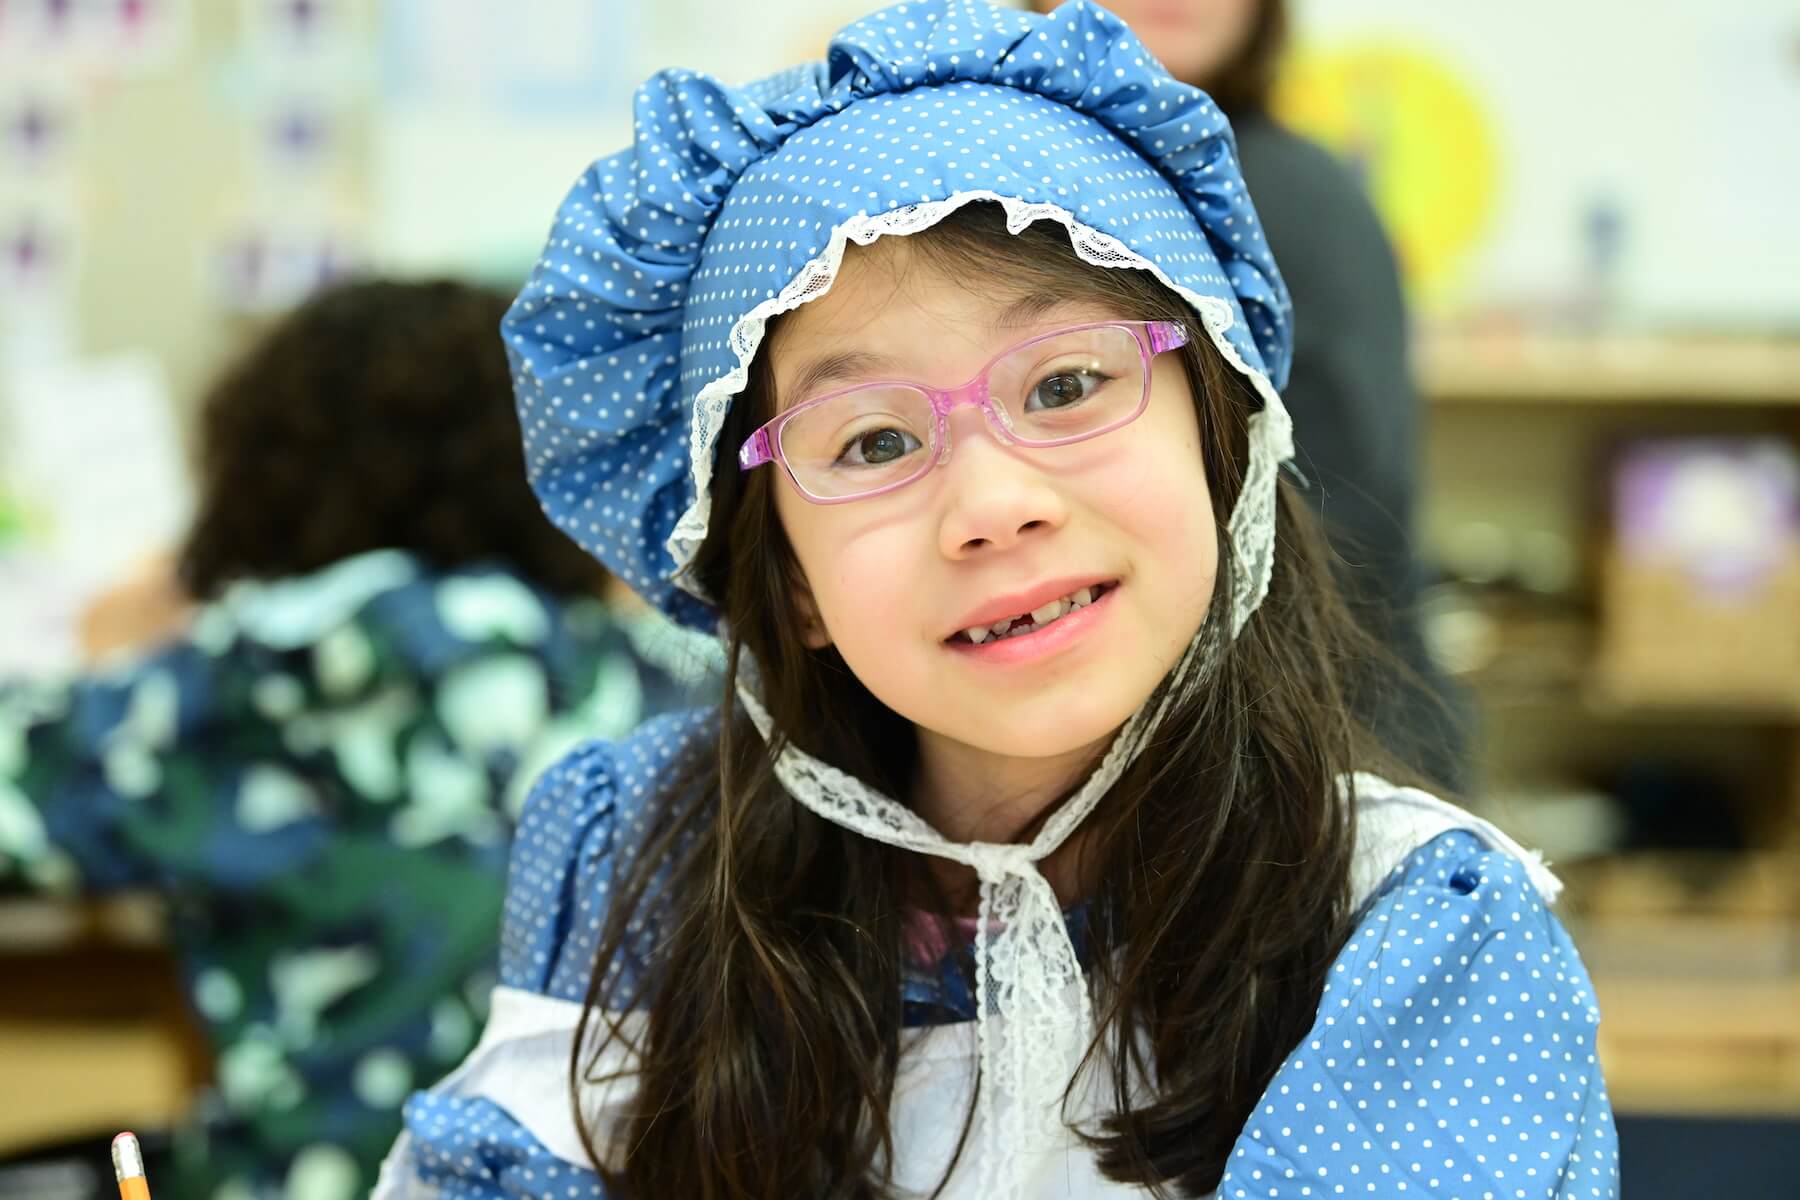 Ethical Culture Fieldston School Ethical Culture student smiles in a period costume with a bonnet